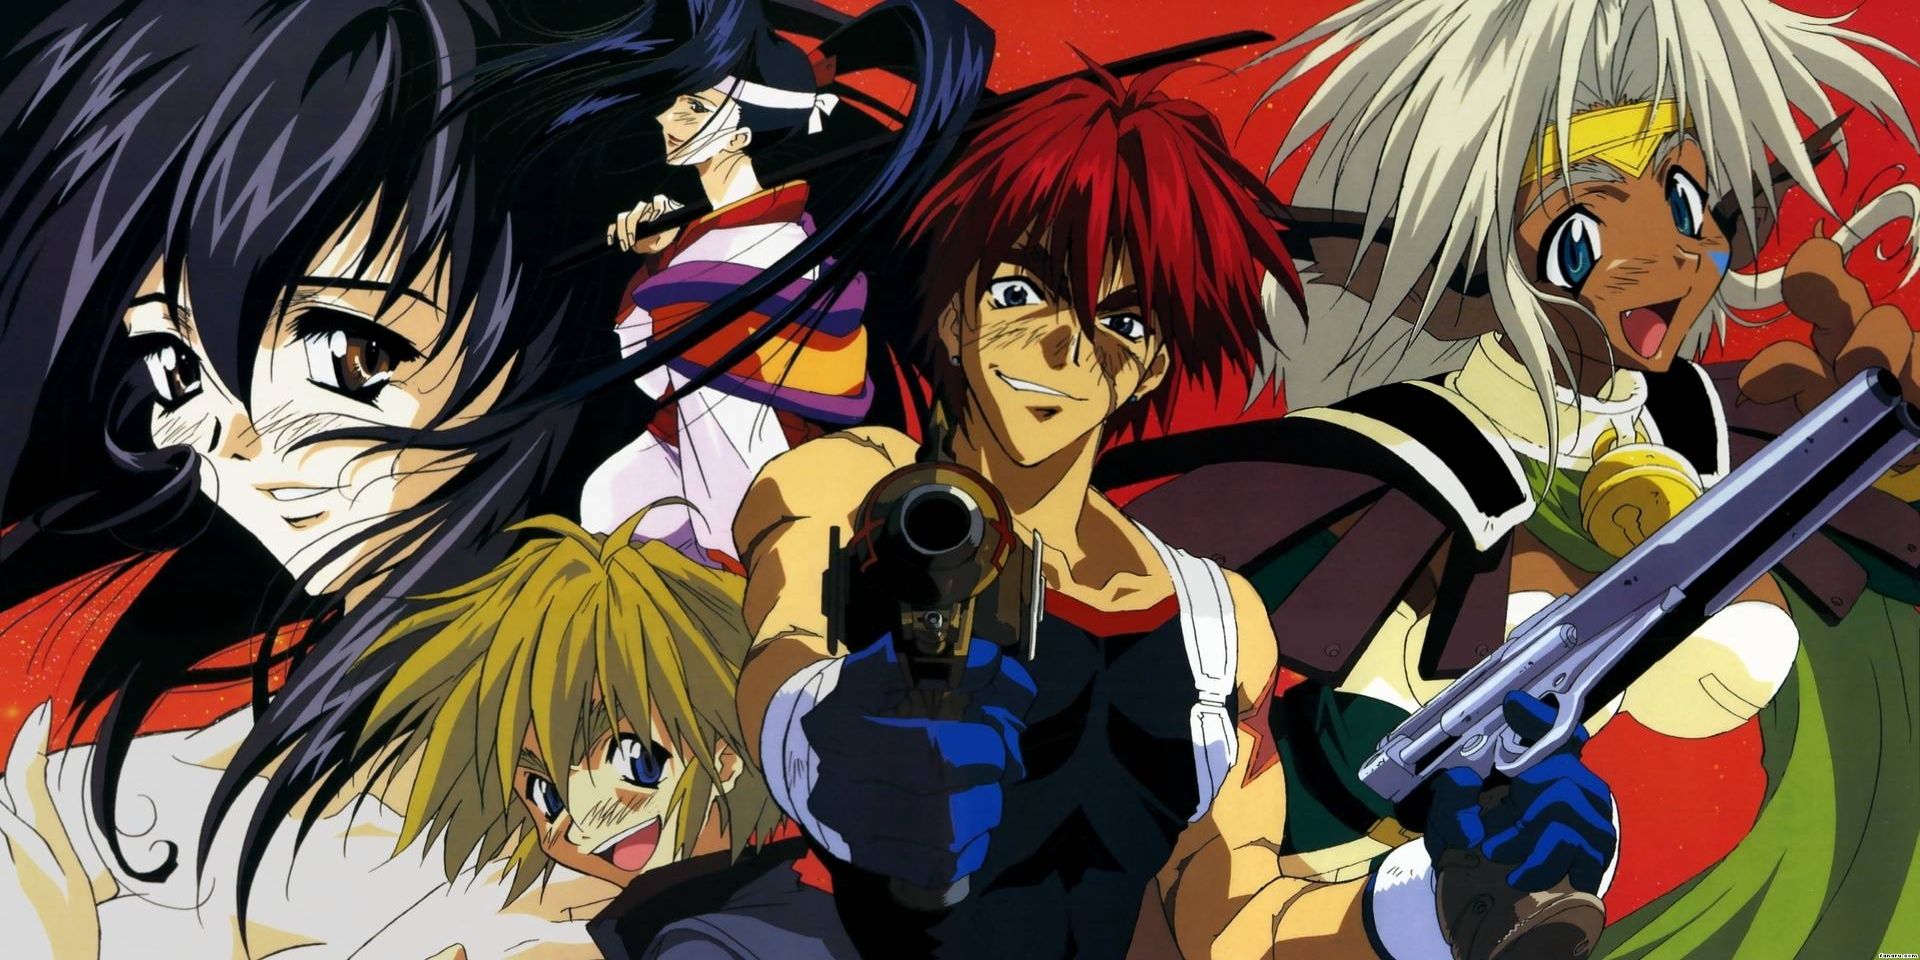 The cast of characters from the anime series Outlaw Star.